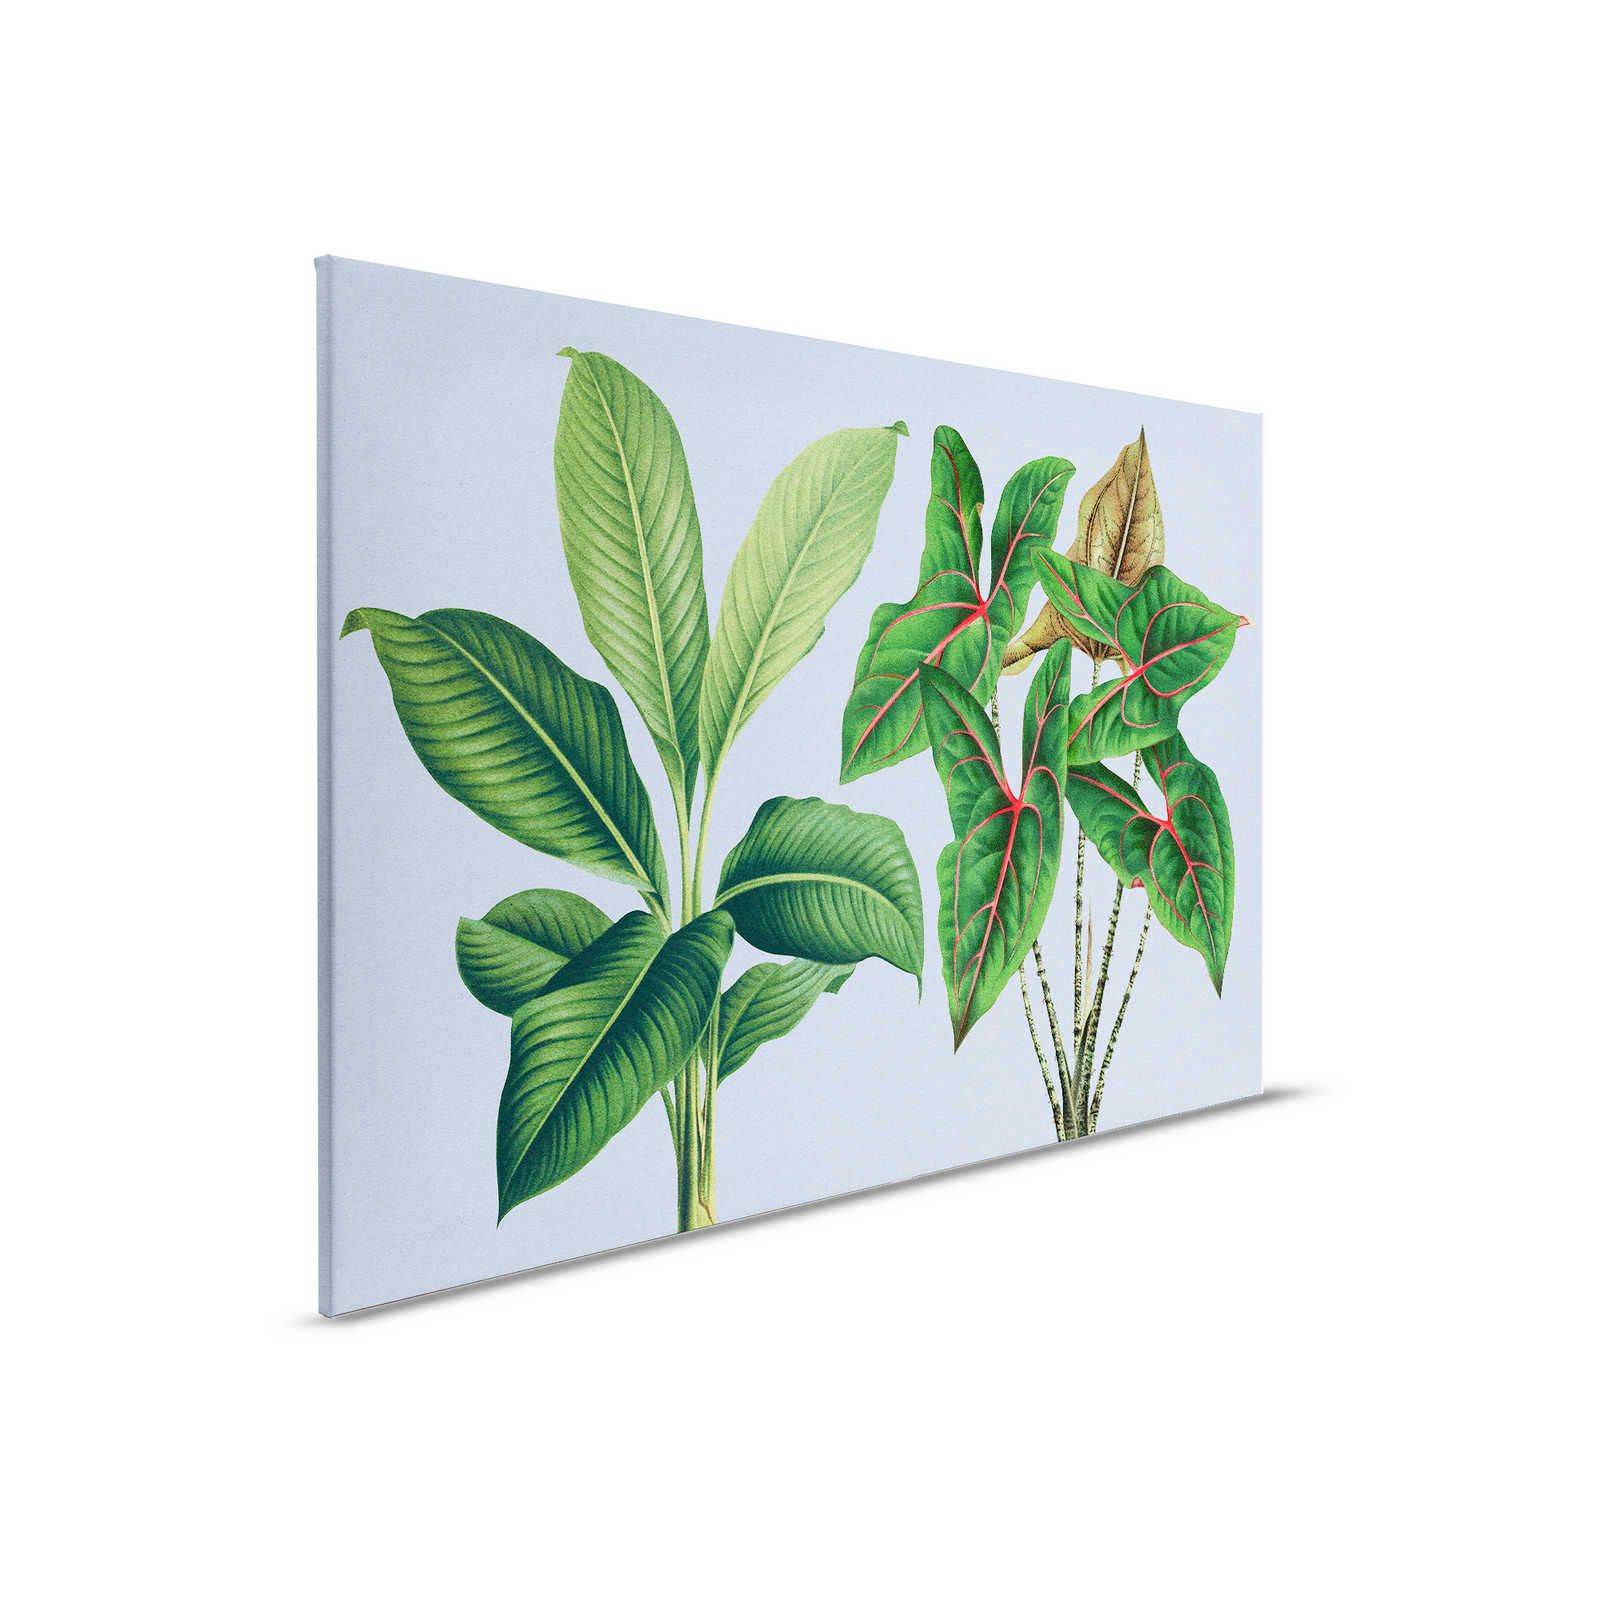 Leaf Garden 1 - Leaves Canvas painting Blue with tropical plants - 0.90 m x 0.60 m
